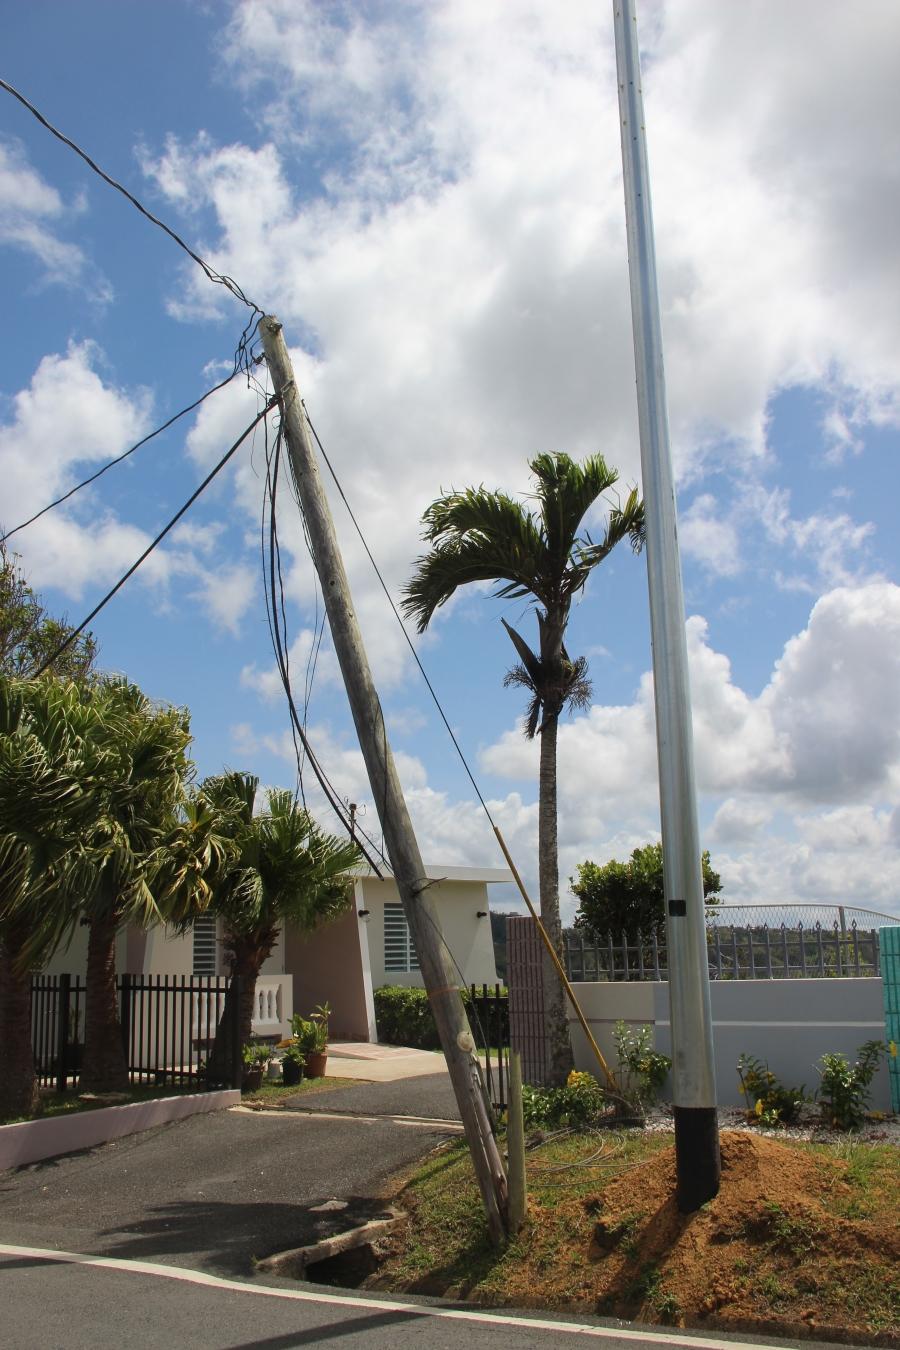 leaning power utility pole in Puerto Rico 